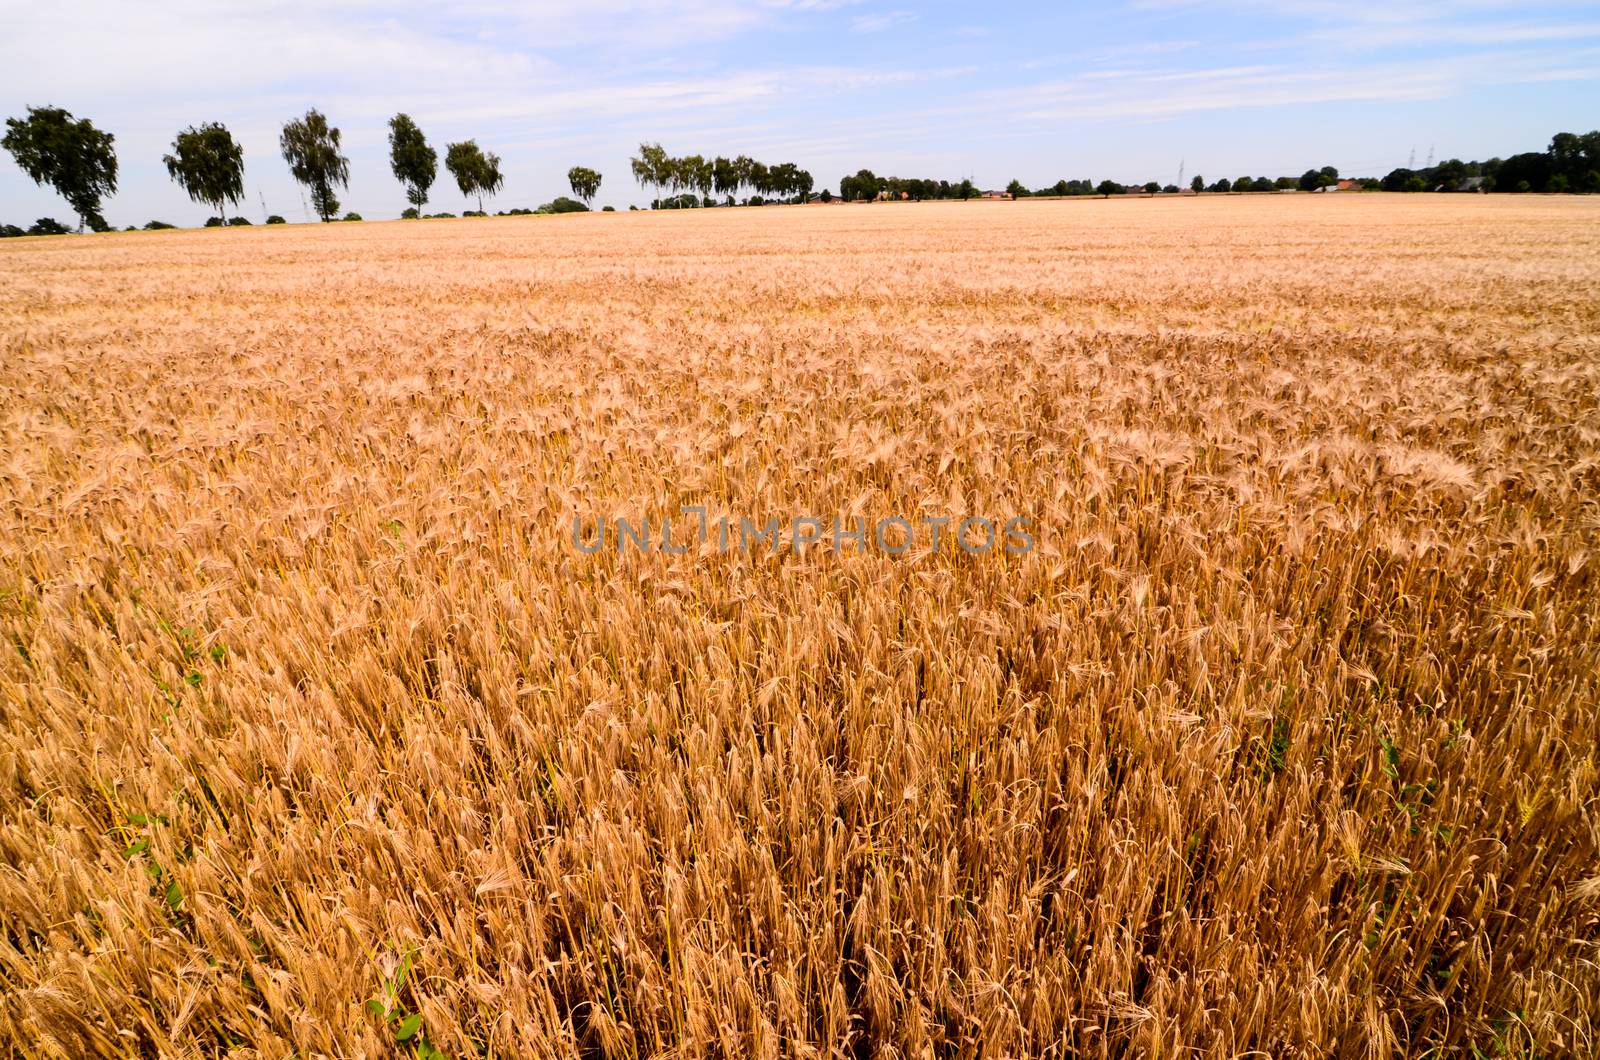 Textured Wheat Field at Europen Countryside in Germany